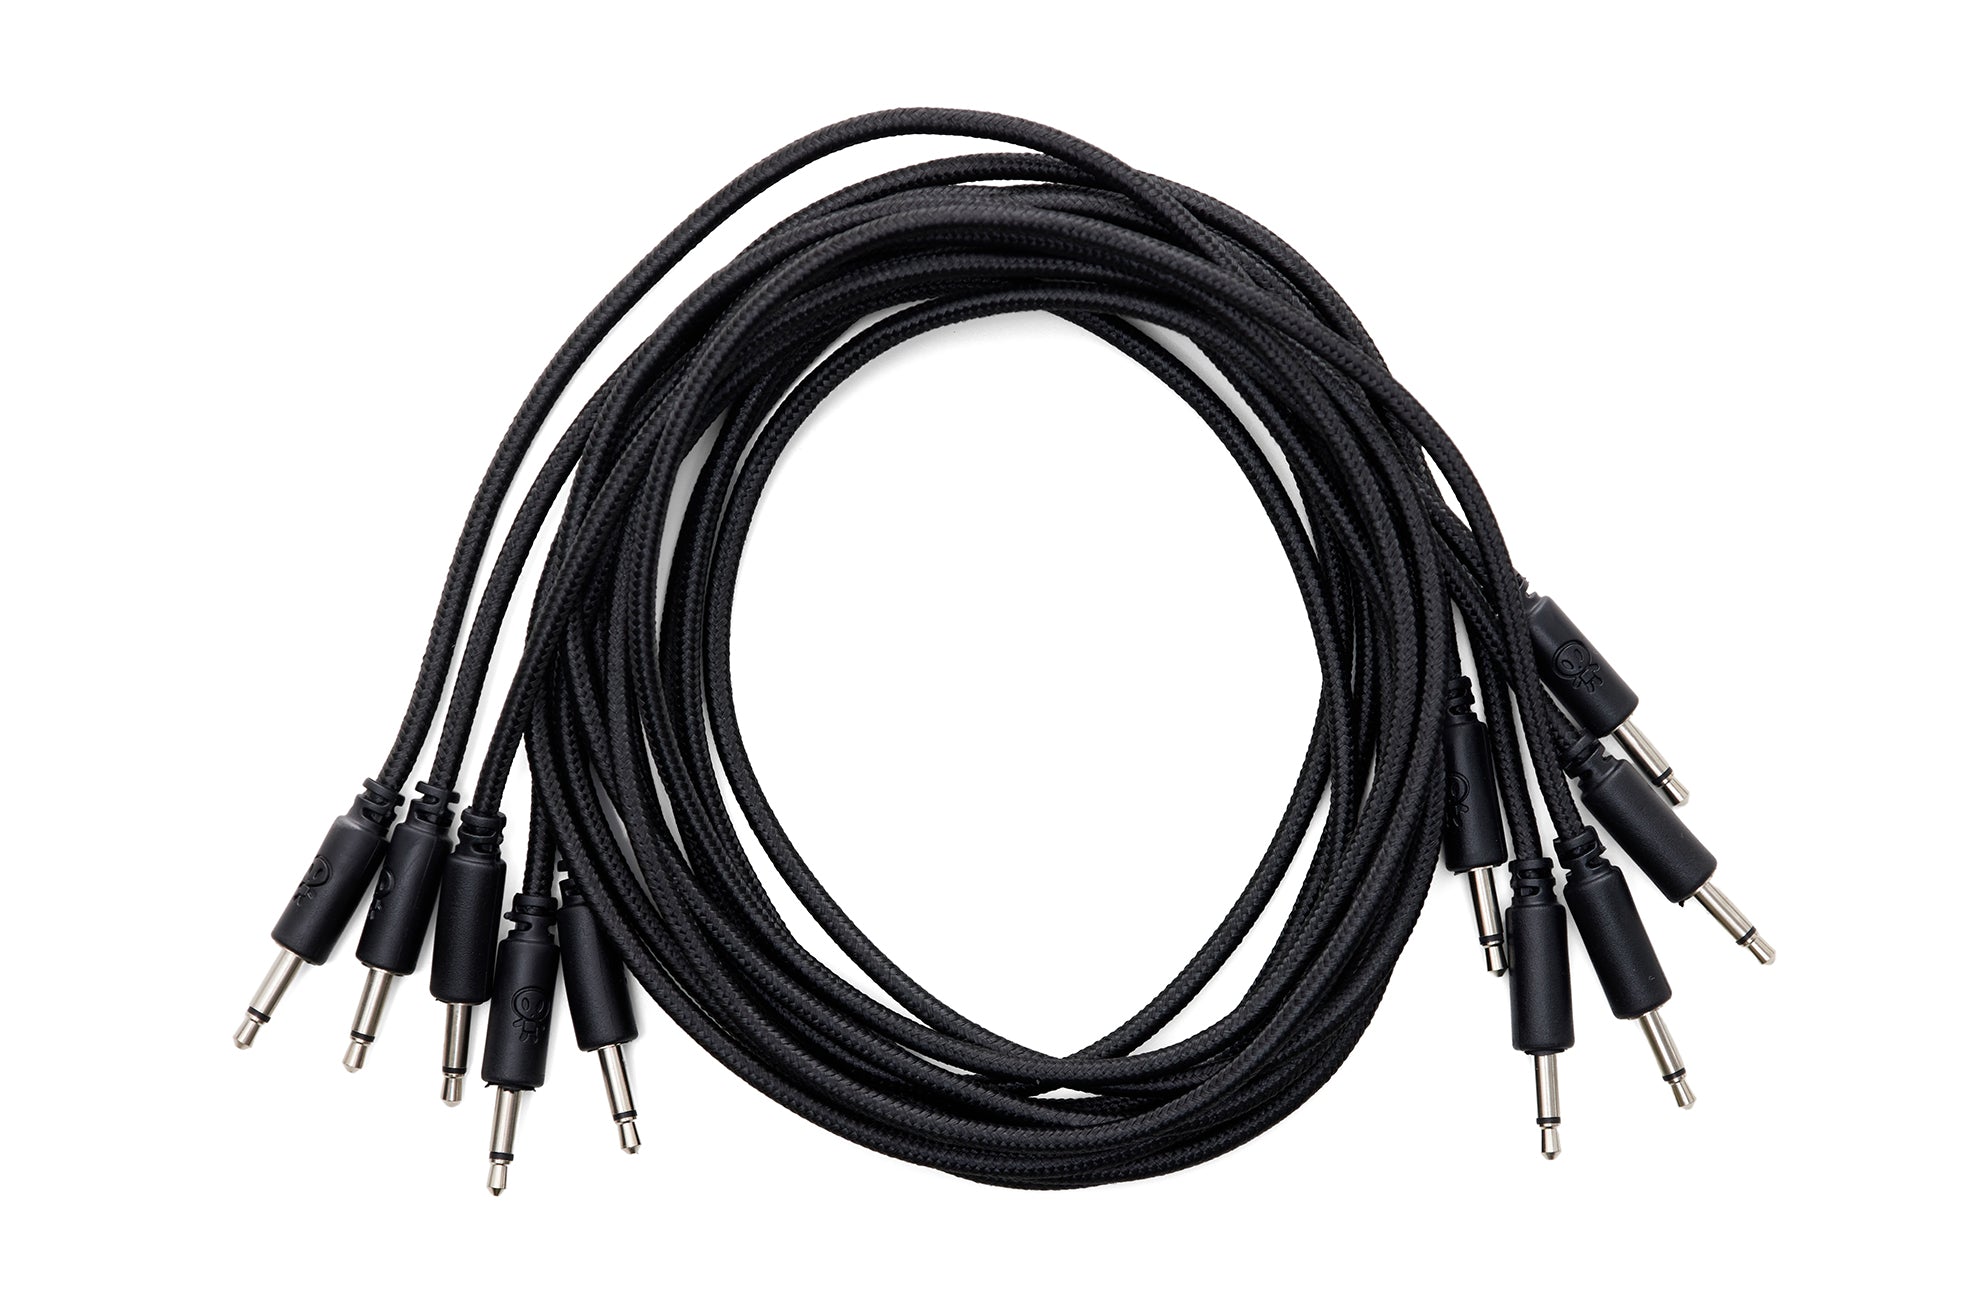 Erica Synths 5 pcs 90 cm braided cables, black